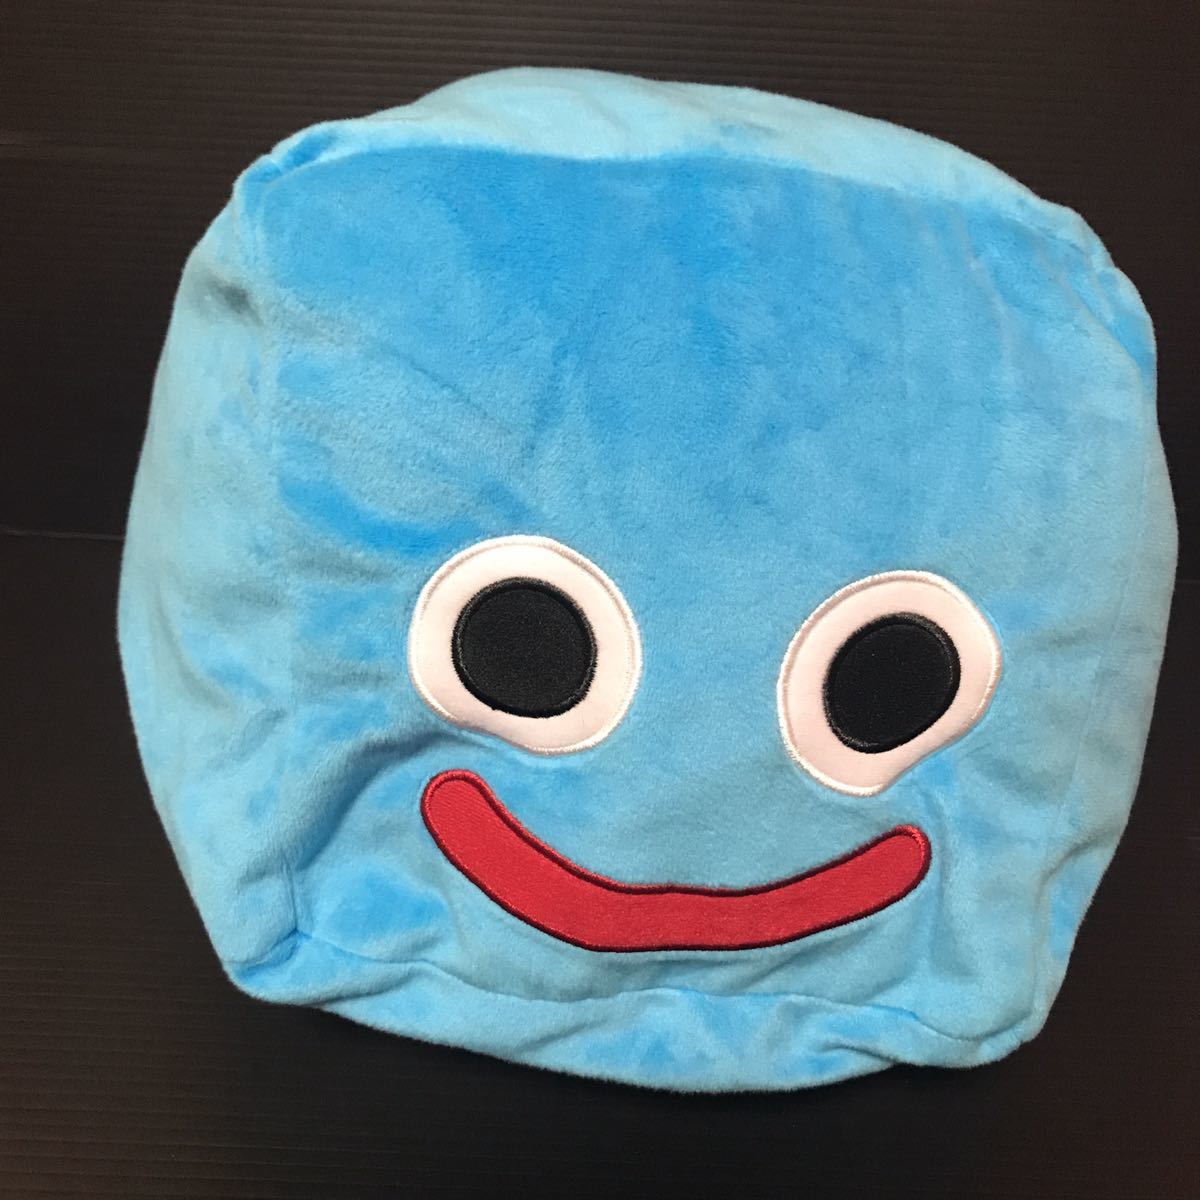  approximately 23cm Dragon Quest anywhere Monstar pare-doAM Cube soft toy Sly m goods soft toy gong keDQ DRAGON QUEST